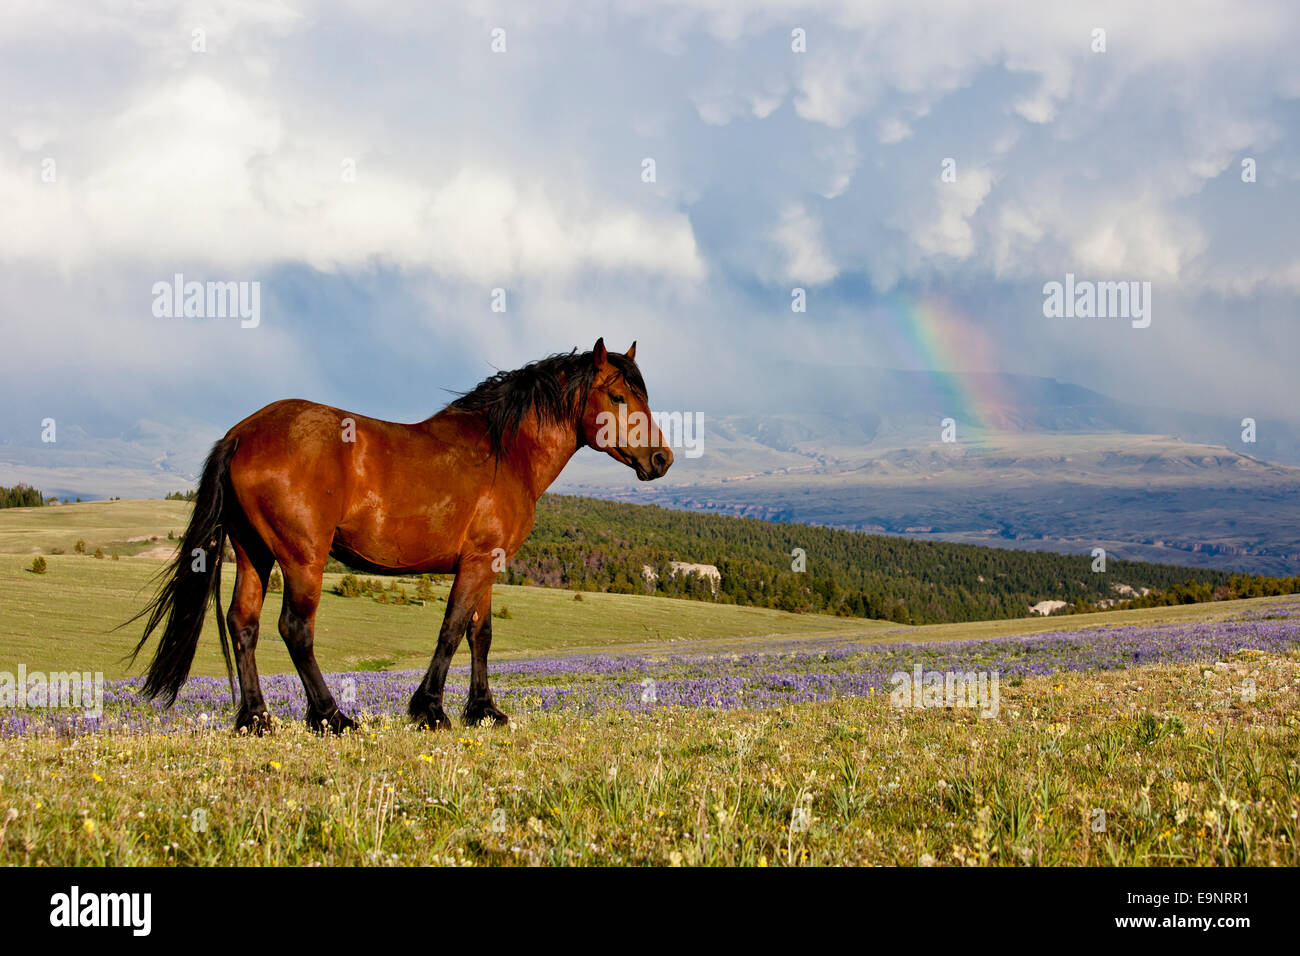 Wild mustang in summer wildflowers after a storm with a rainbow visible Stock Photo